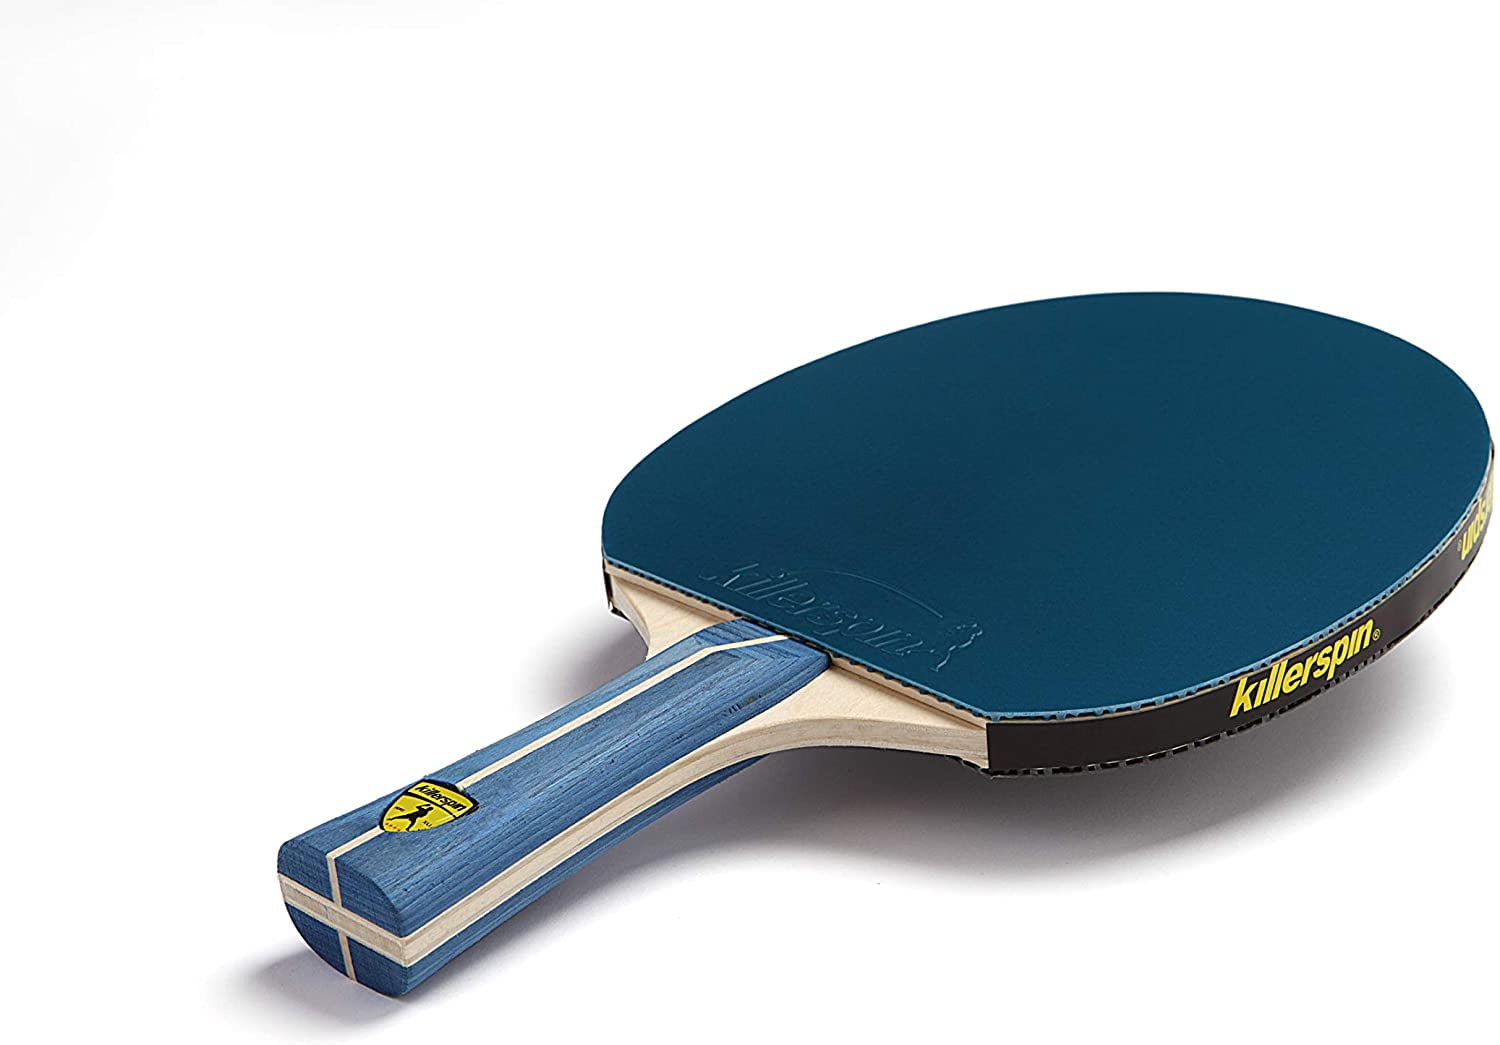 Wood ping pong paddle table tennis rubber with sponge pingpong bat racket blade 